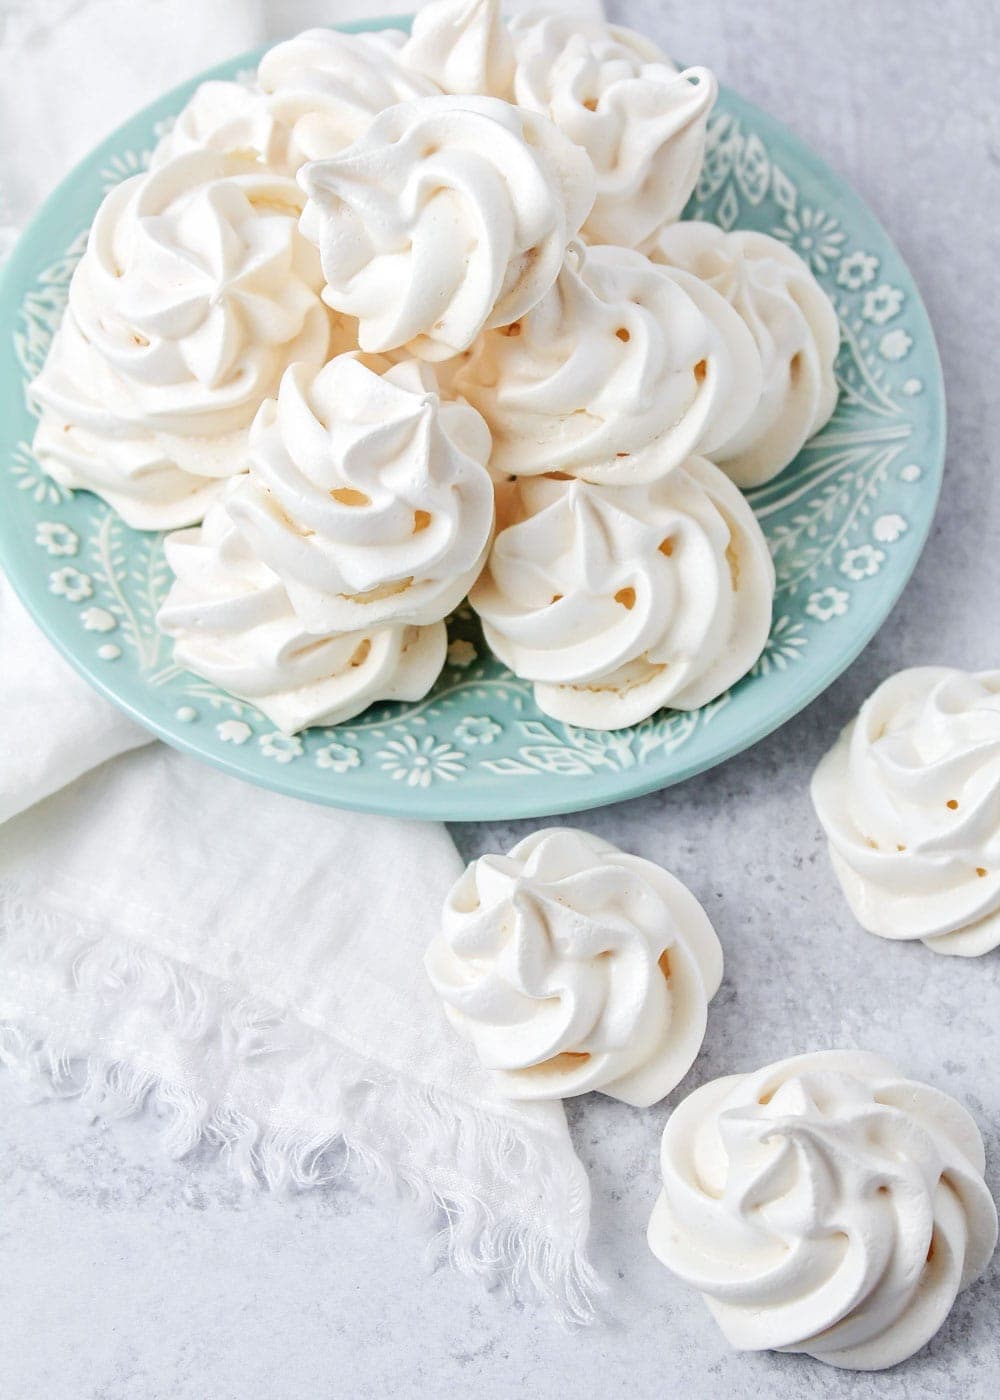 Close up of meringue cookies on a blue plate